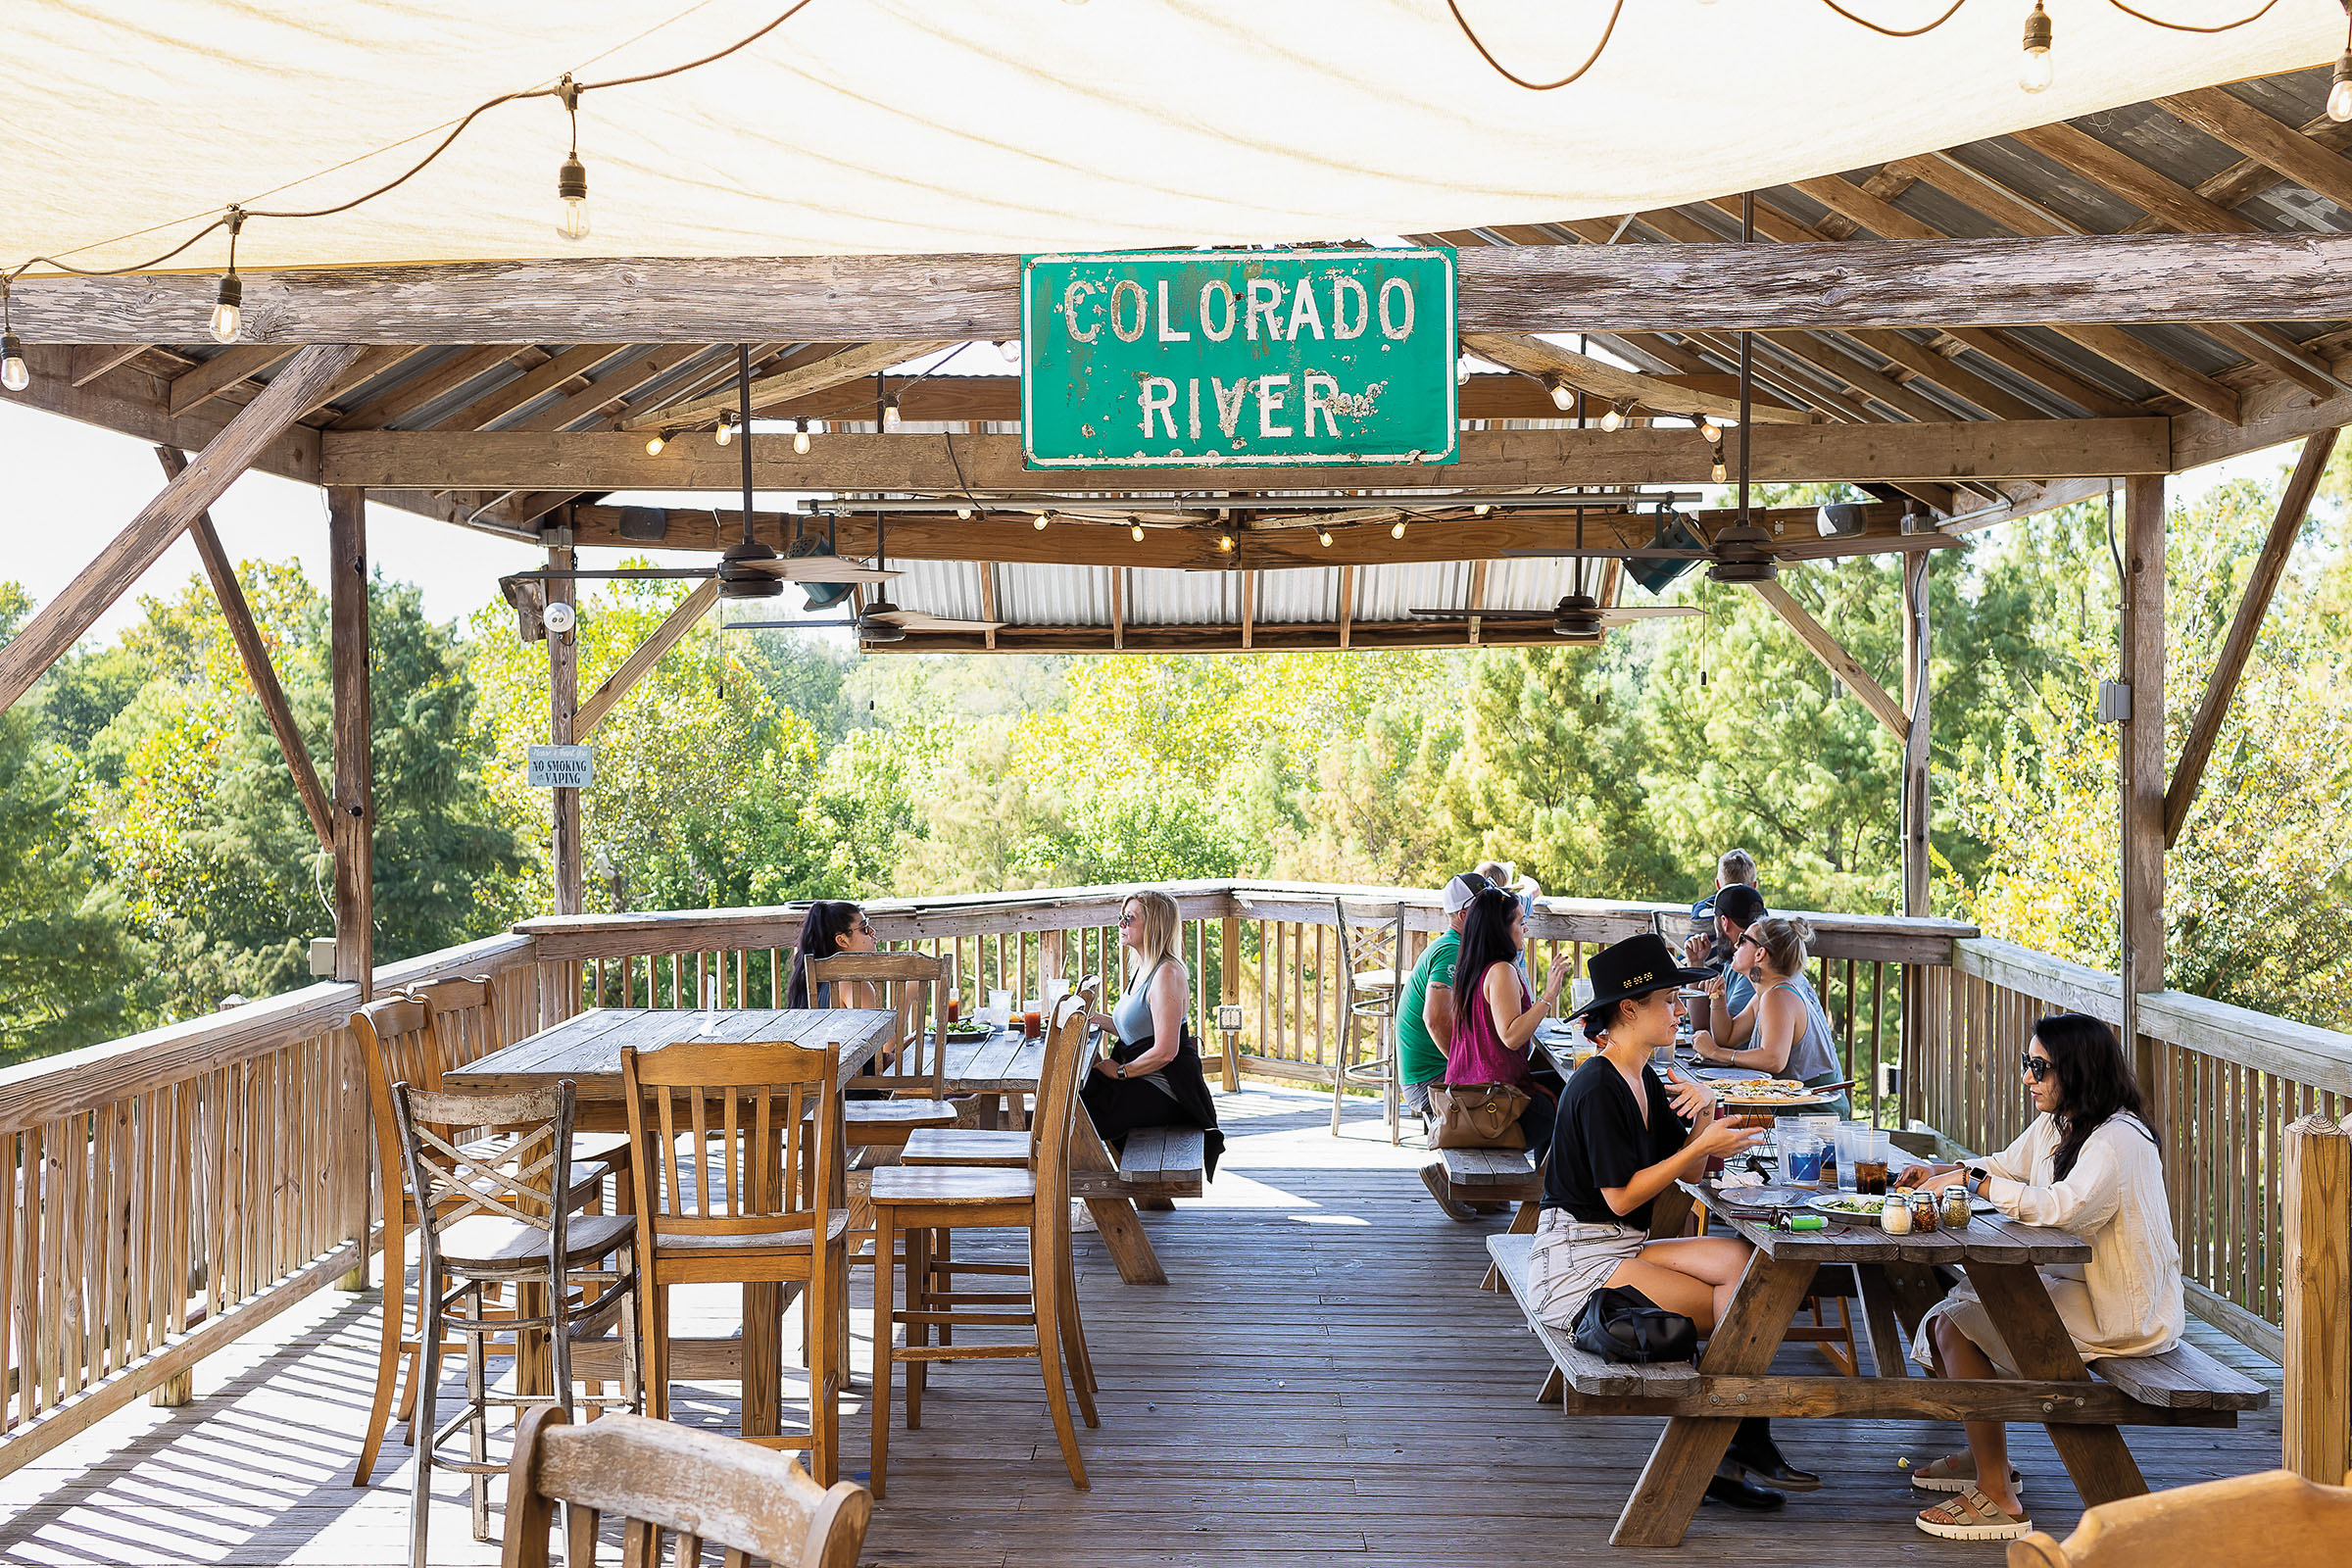 A group of people sit on a porch in a lush green setting under a green sign reading "Colorado River"